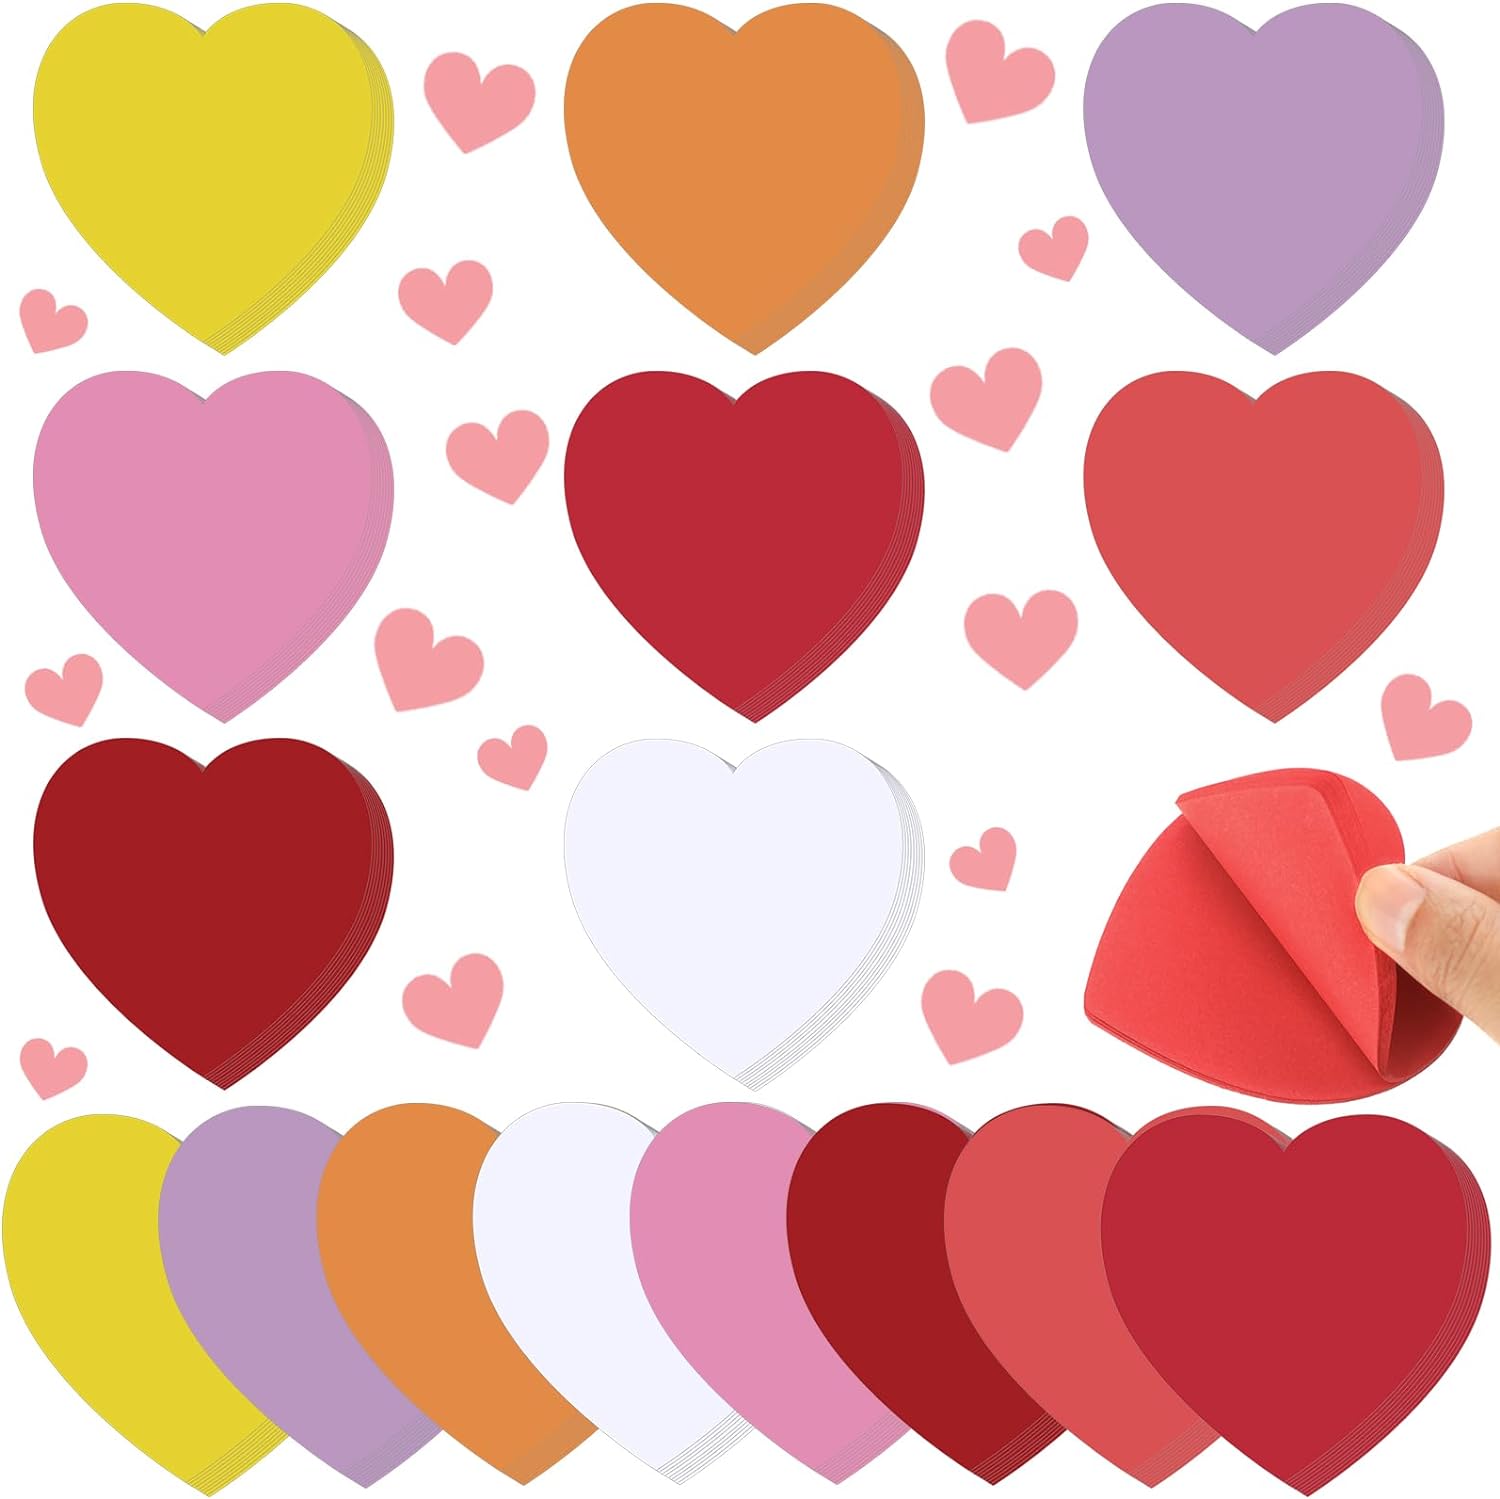 BBTO 720 Sheets Heart Shaped Sticky Notes Valentine' Day Sticky Memo Funny Self Stick 3 x 3 Inch Colorful Cute Note Pads Removable Easy to Post for Office School Home Business Girls(Bright Color)